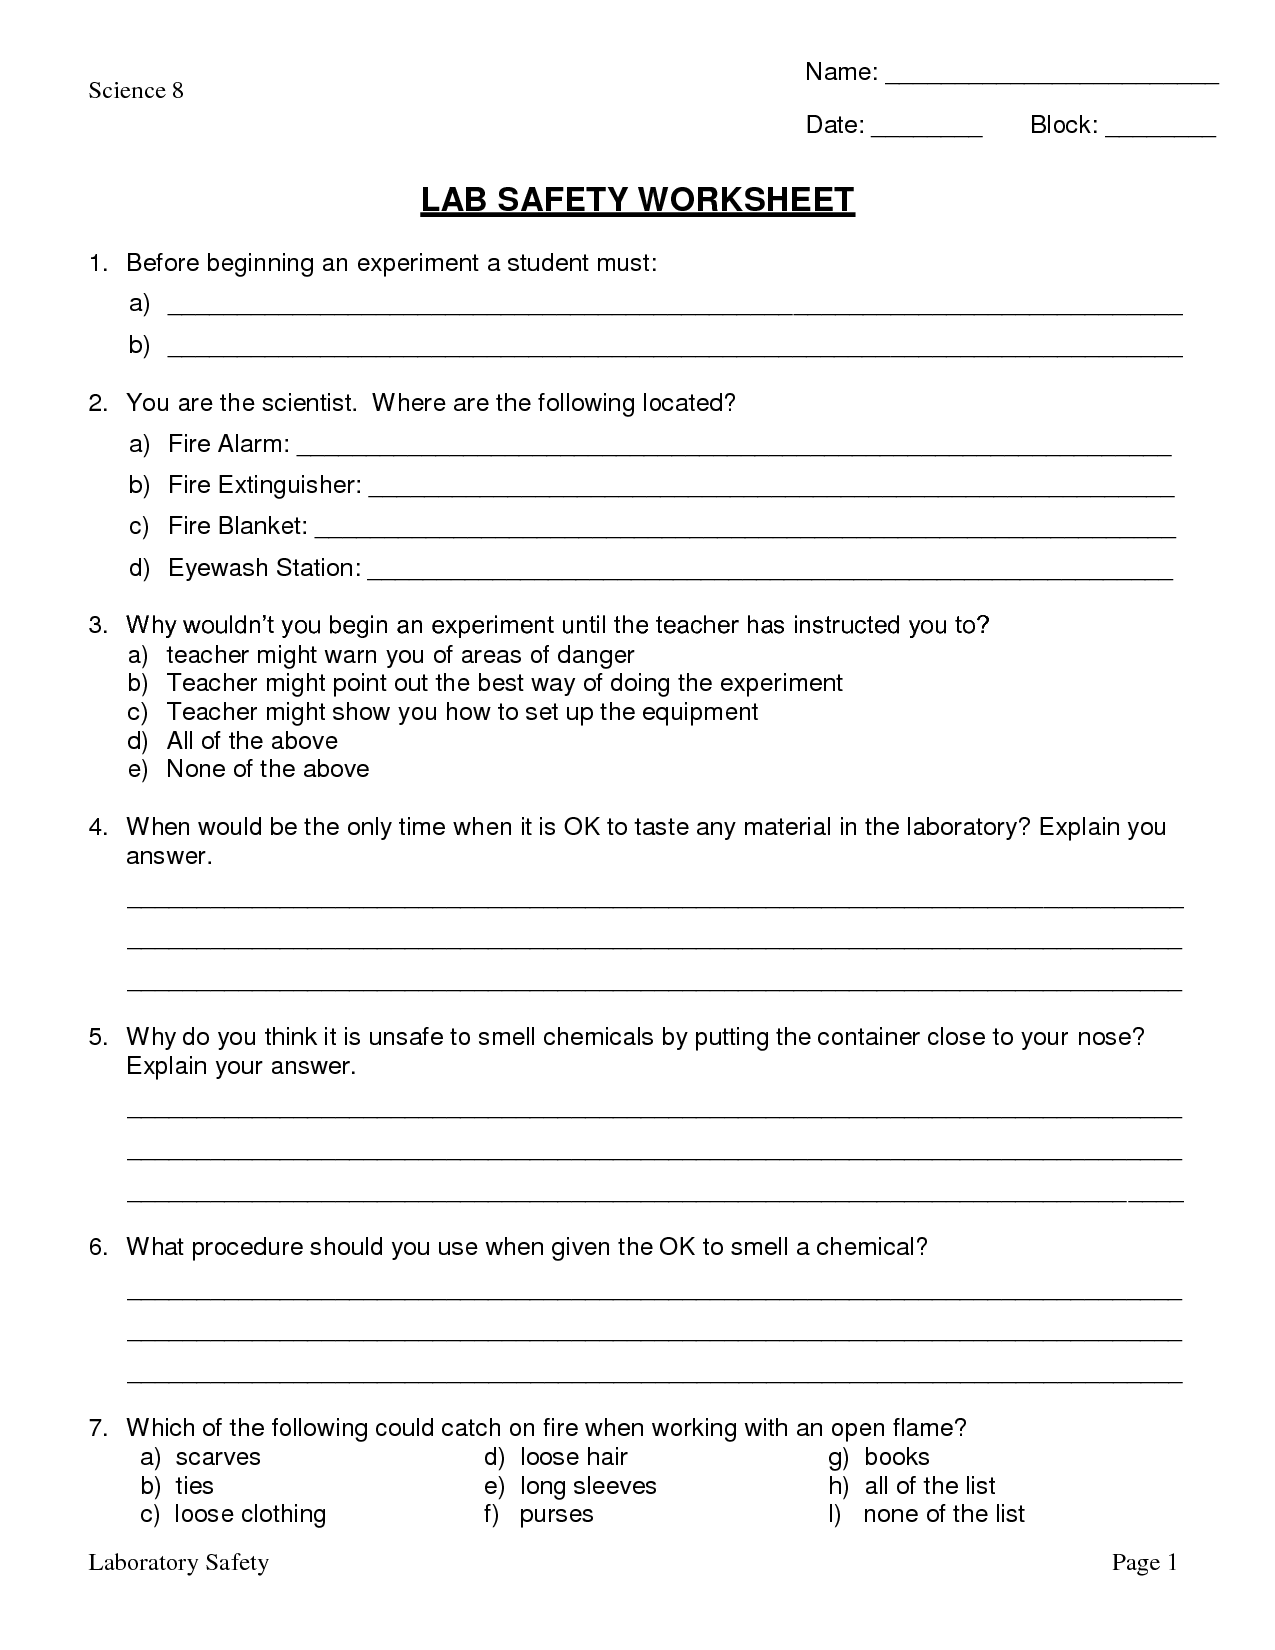 11-best-images-of-lab-equipment-worksheet-answers-science-lab-equipment-worksheet-science-lab